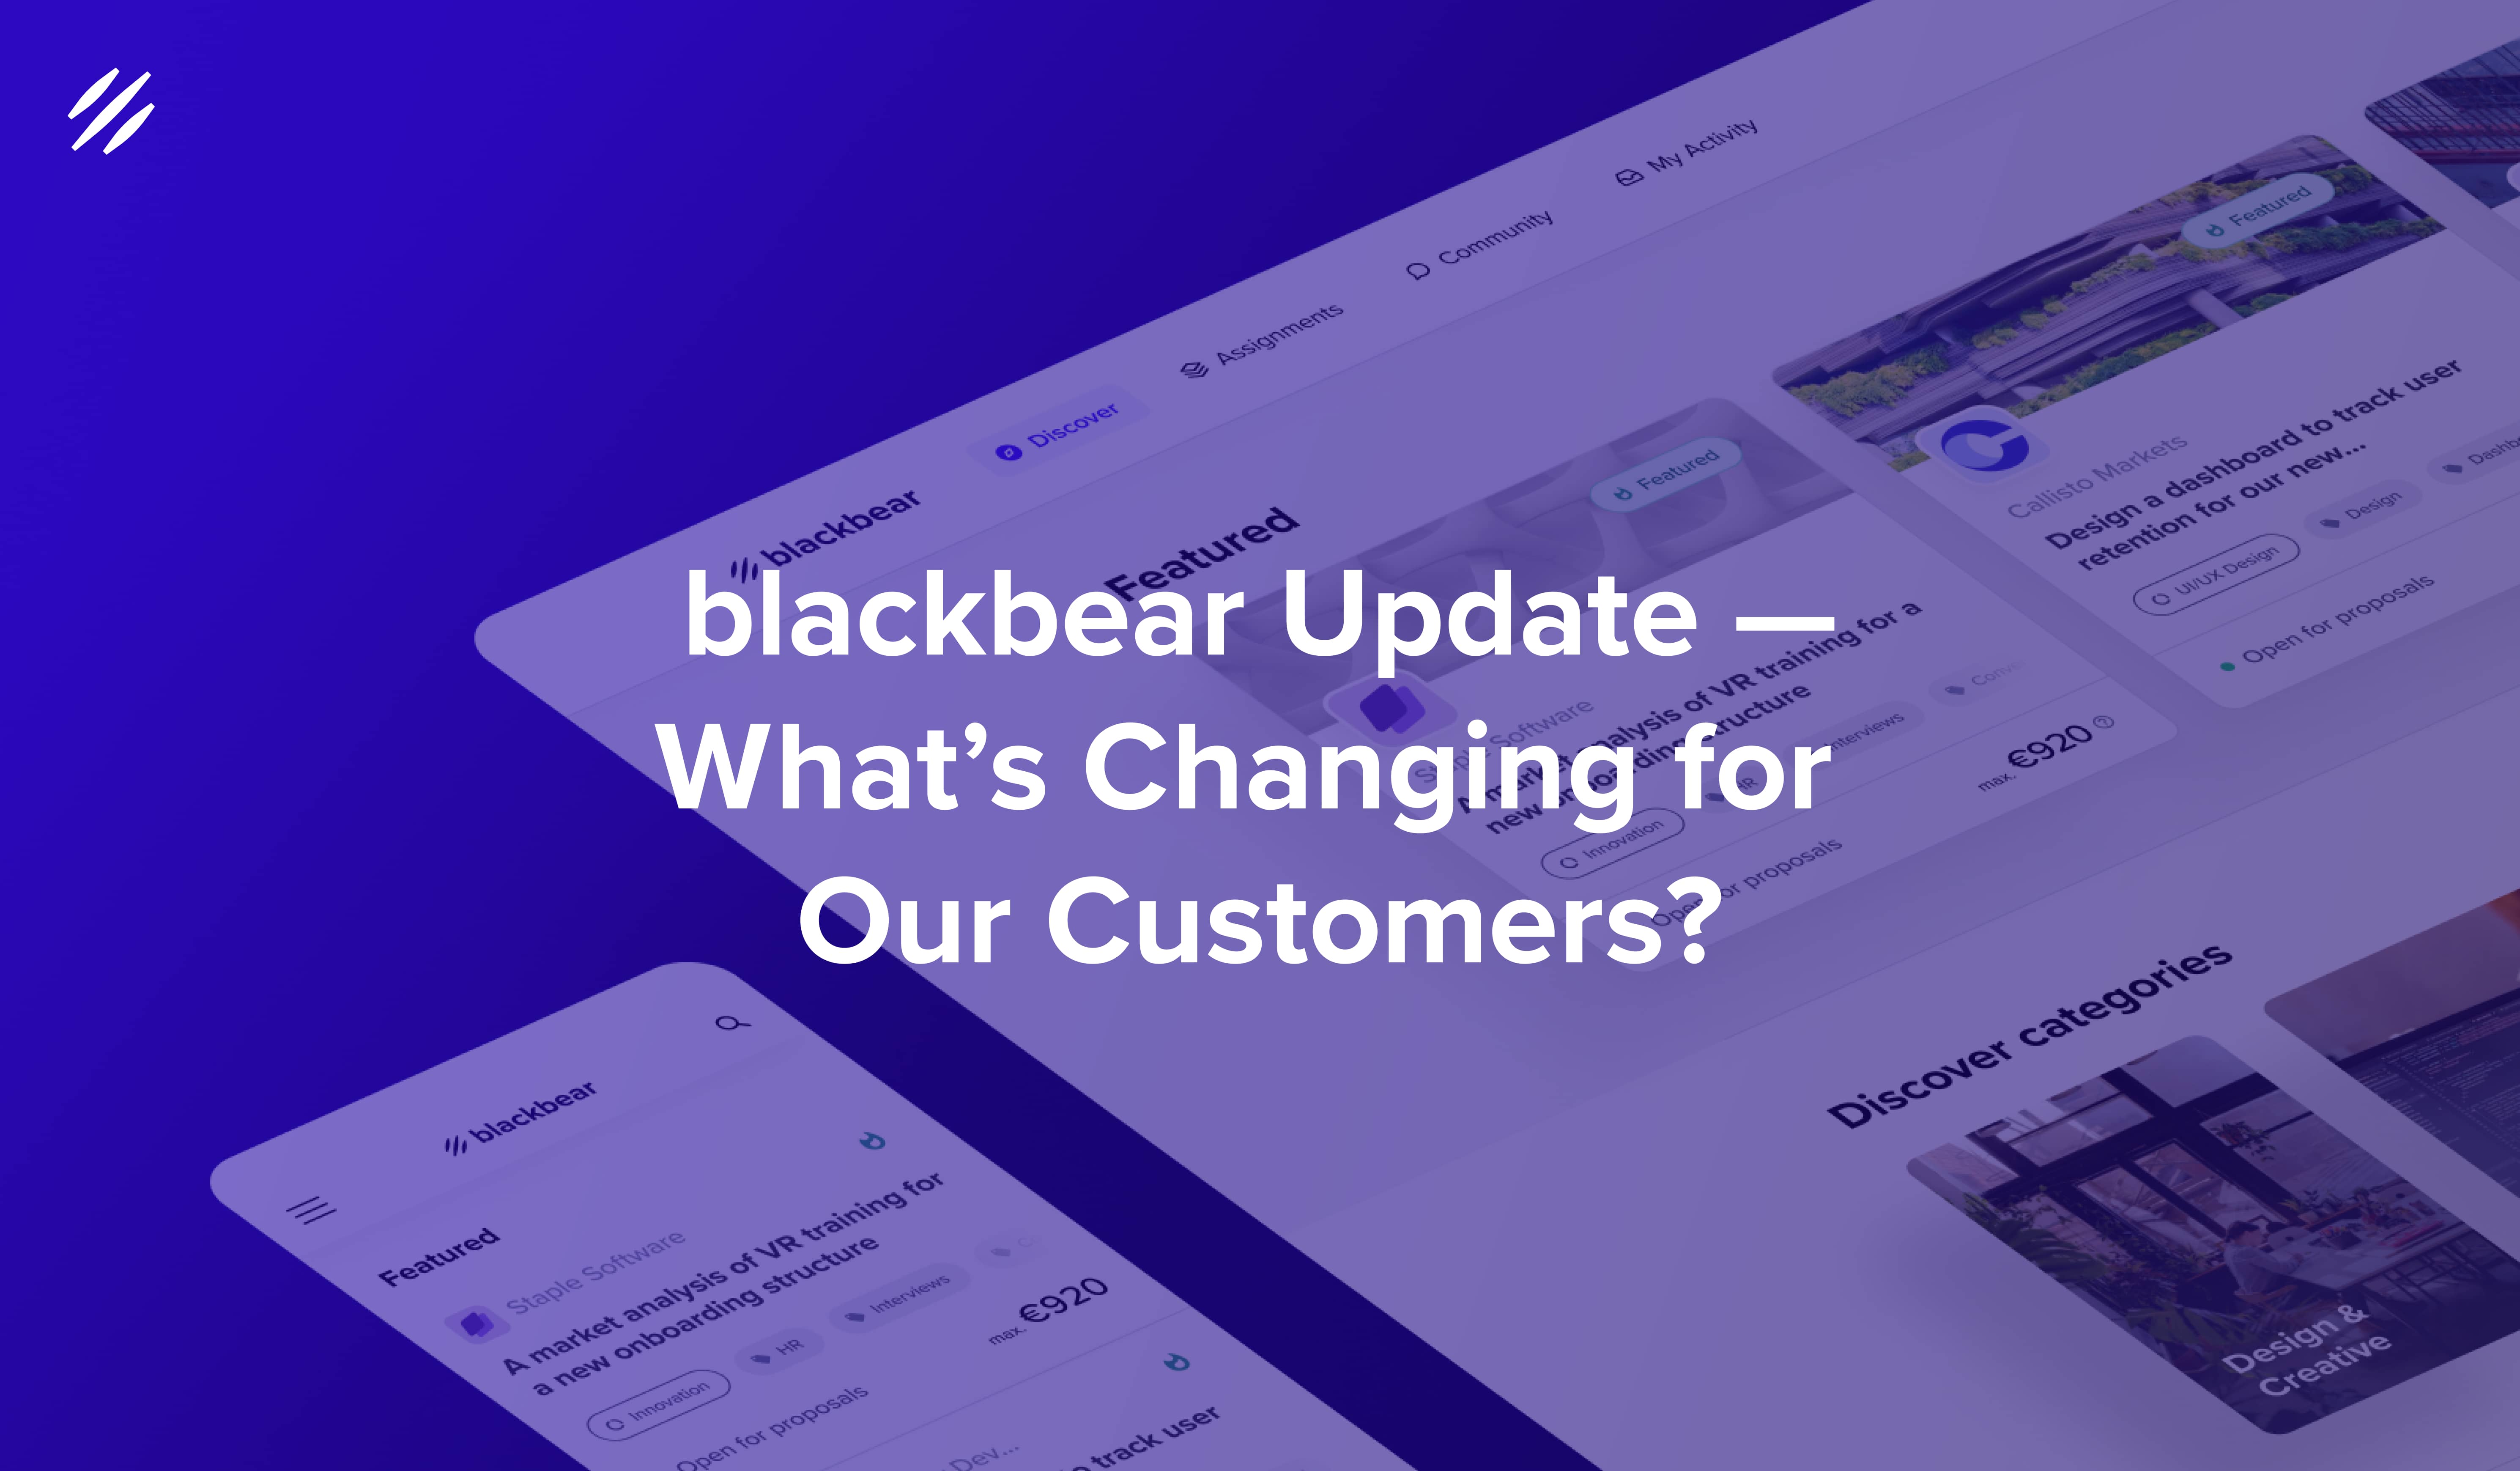 blackbear Platform Update — What's Changing for Our Customers?